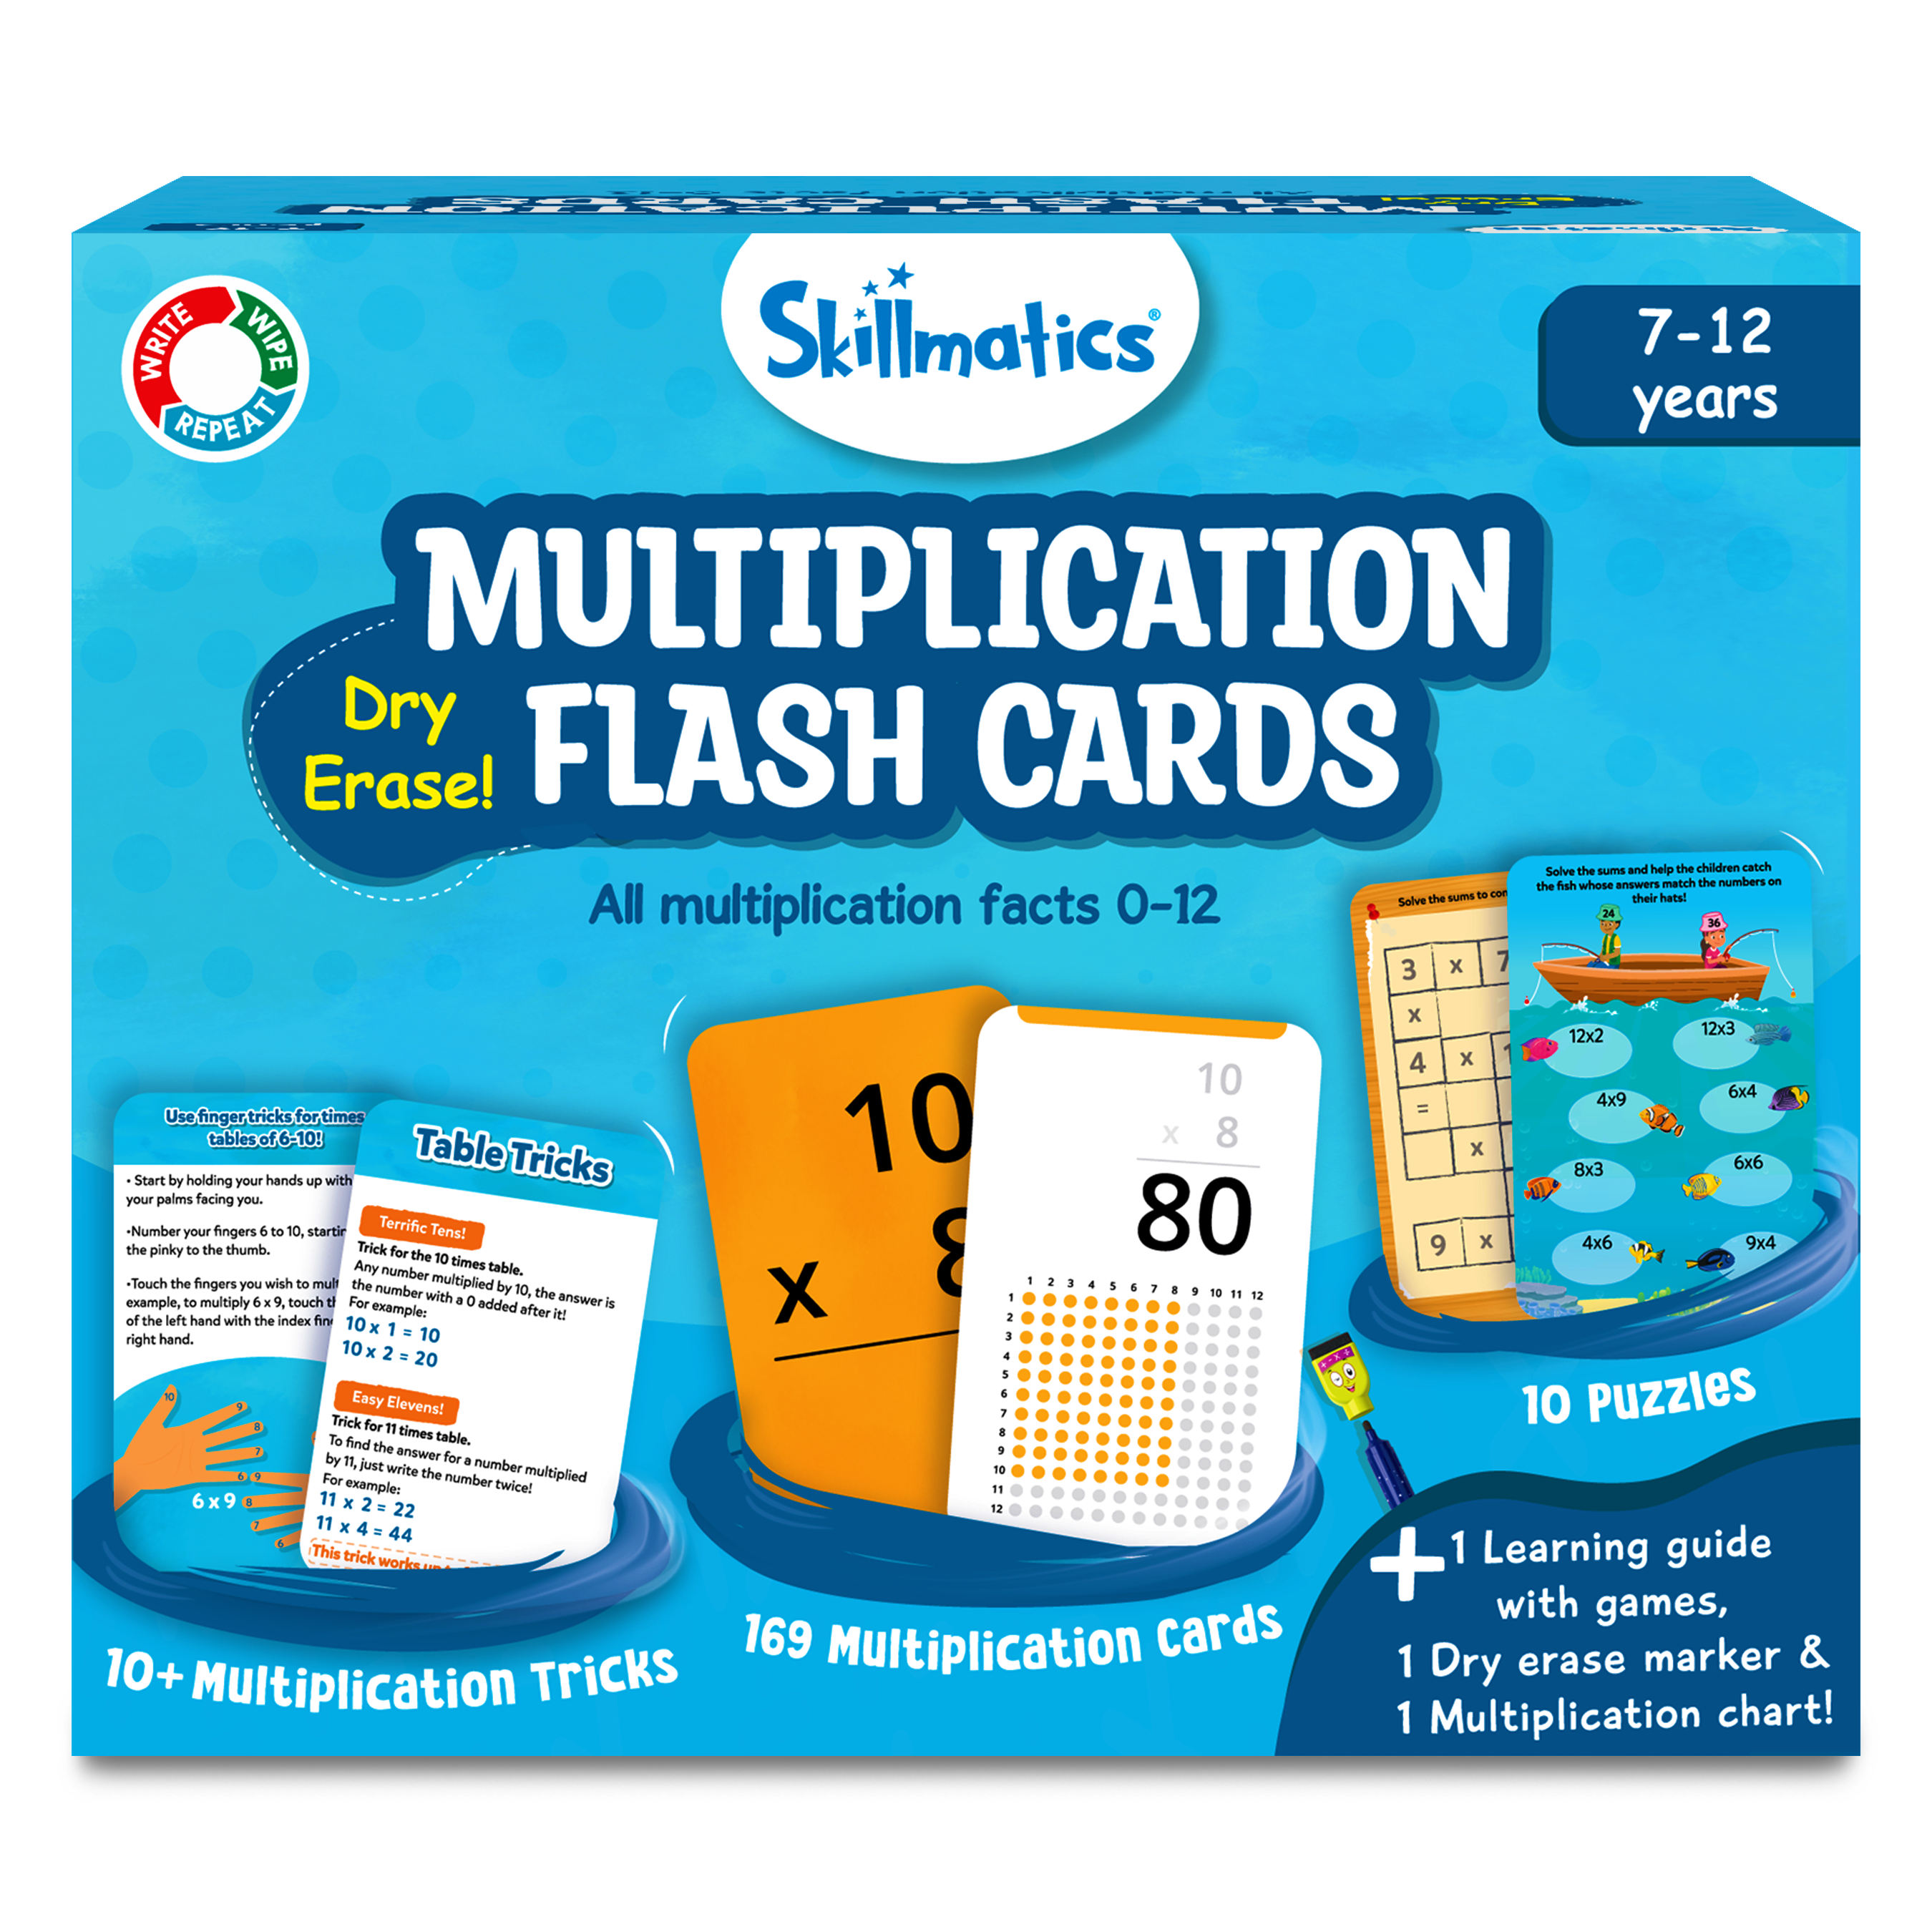 Skillmatics Multiplication Flash Cards (Numbers 0-12) - 169 Cards with Dry Erase Marker, 2nd to 6th Grade Math Practice, Bonus Puzzles, Tips, Tricks, Games & Chart Included